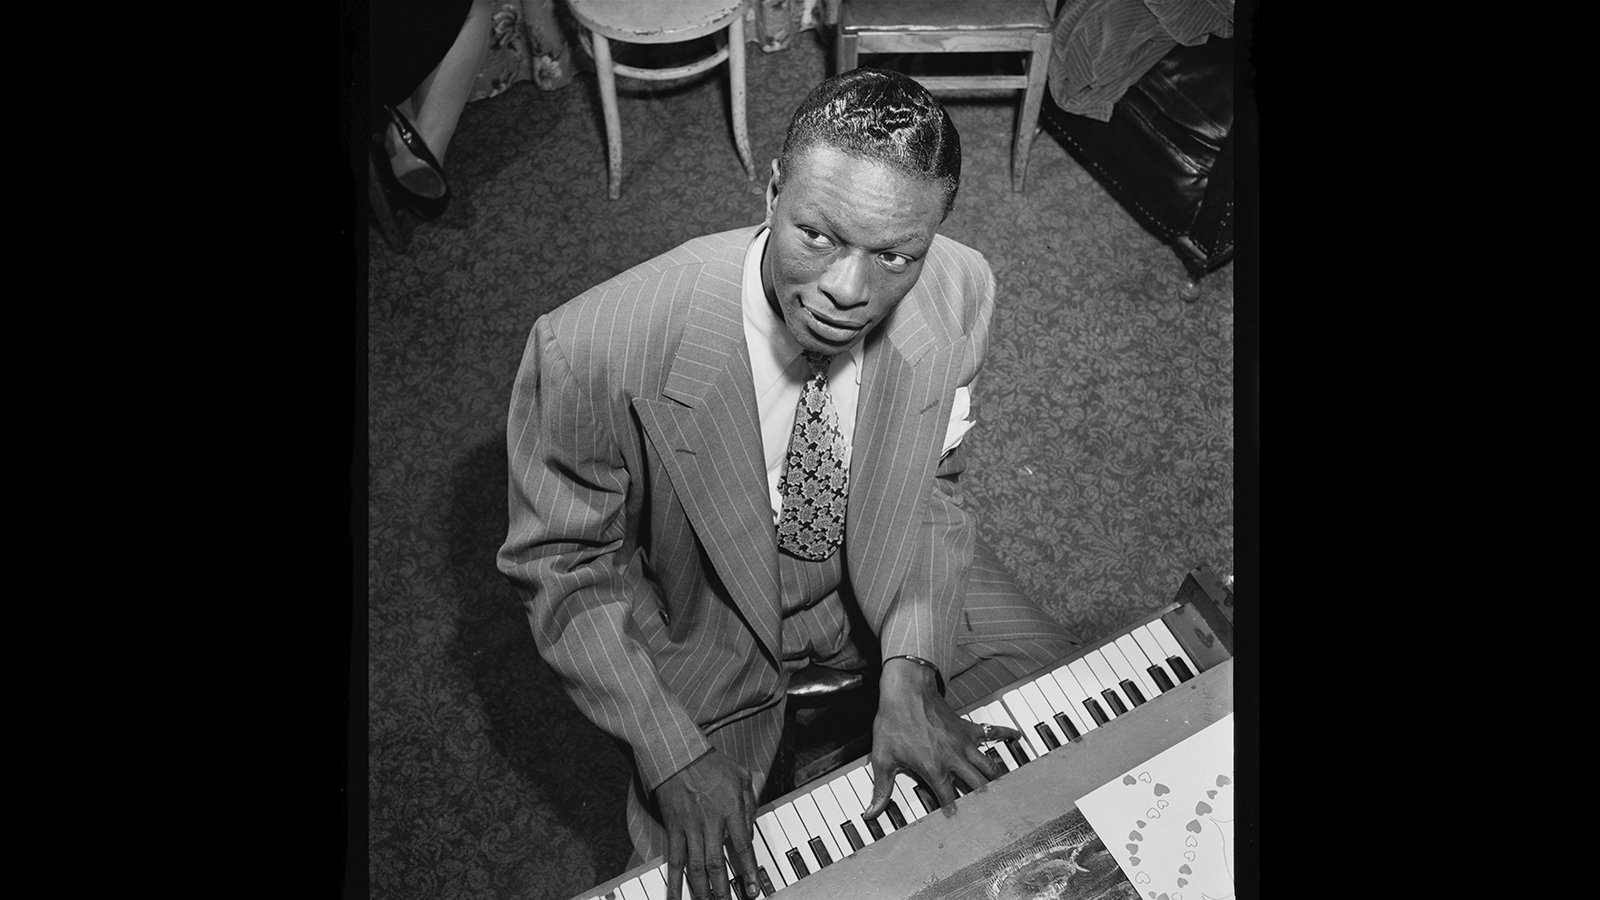 A black and white photo of Nat King Cole playing piano, while wearing a suit and tie.